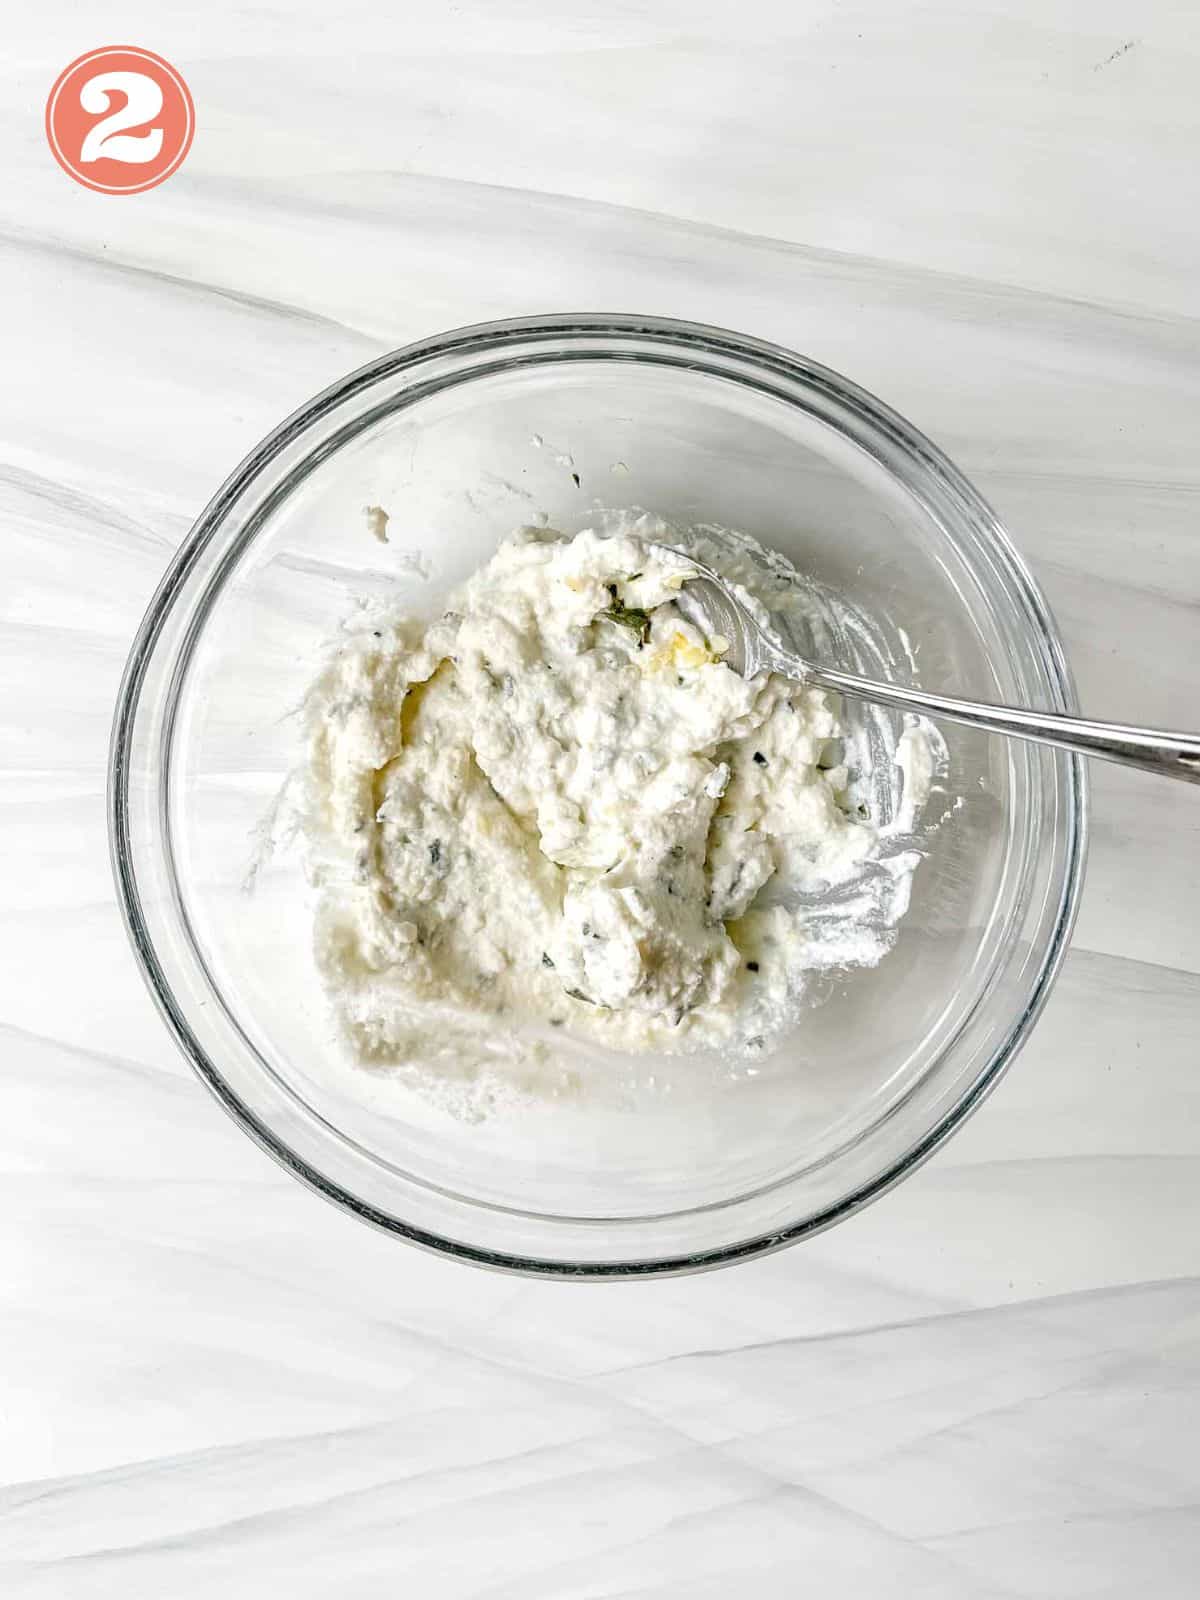 ricotta and herbs mixed in a glass bowl labelled number two.